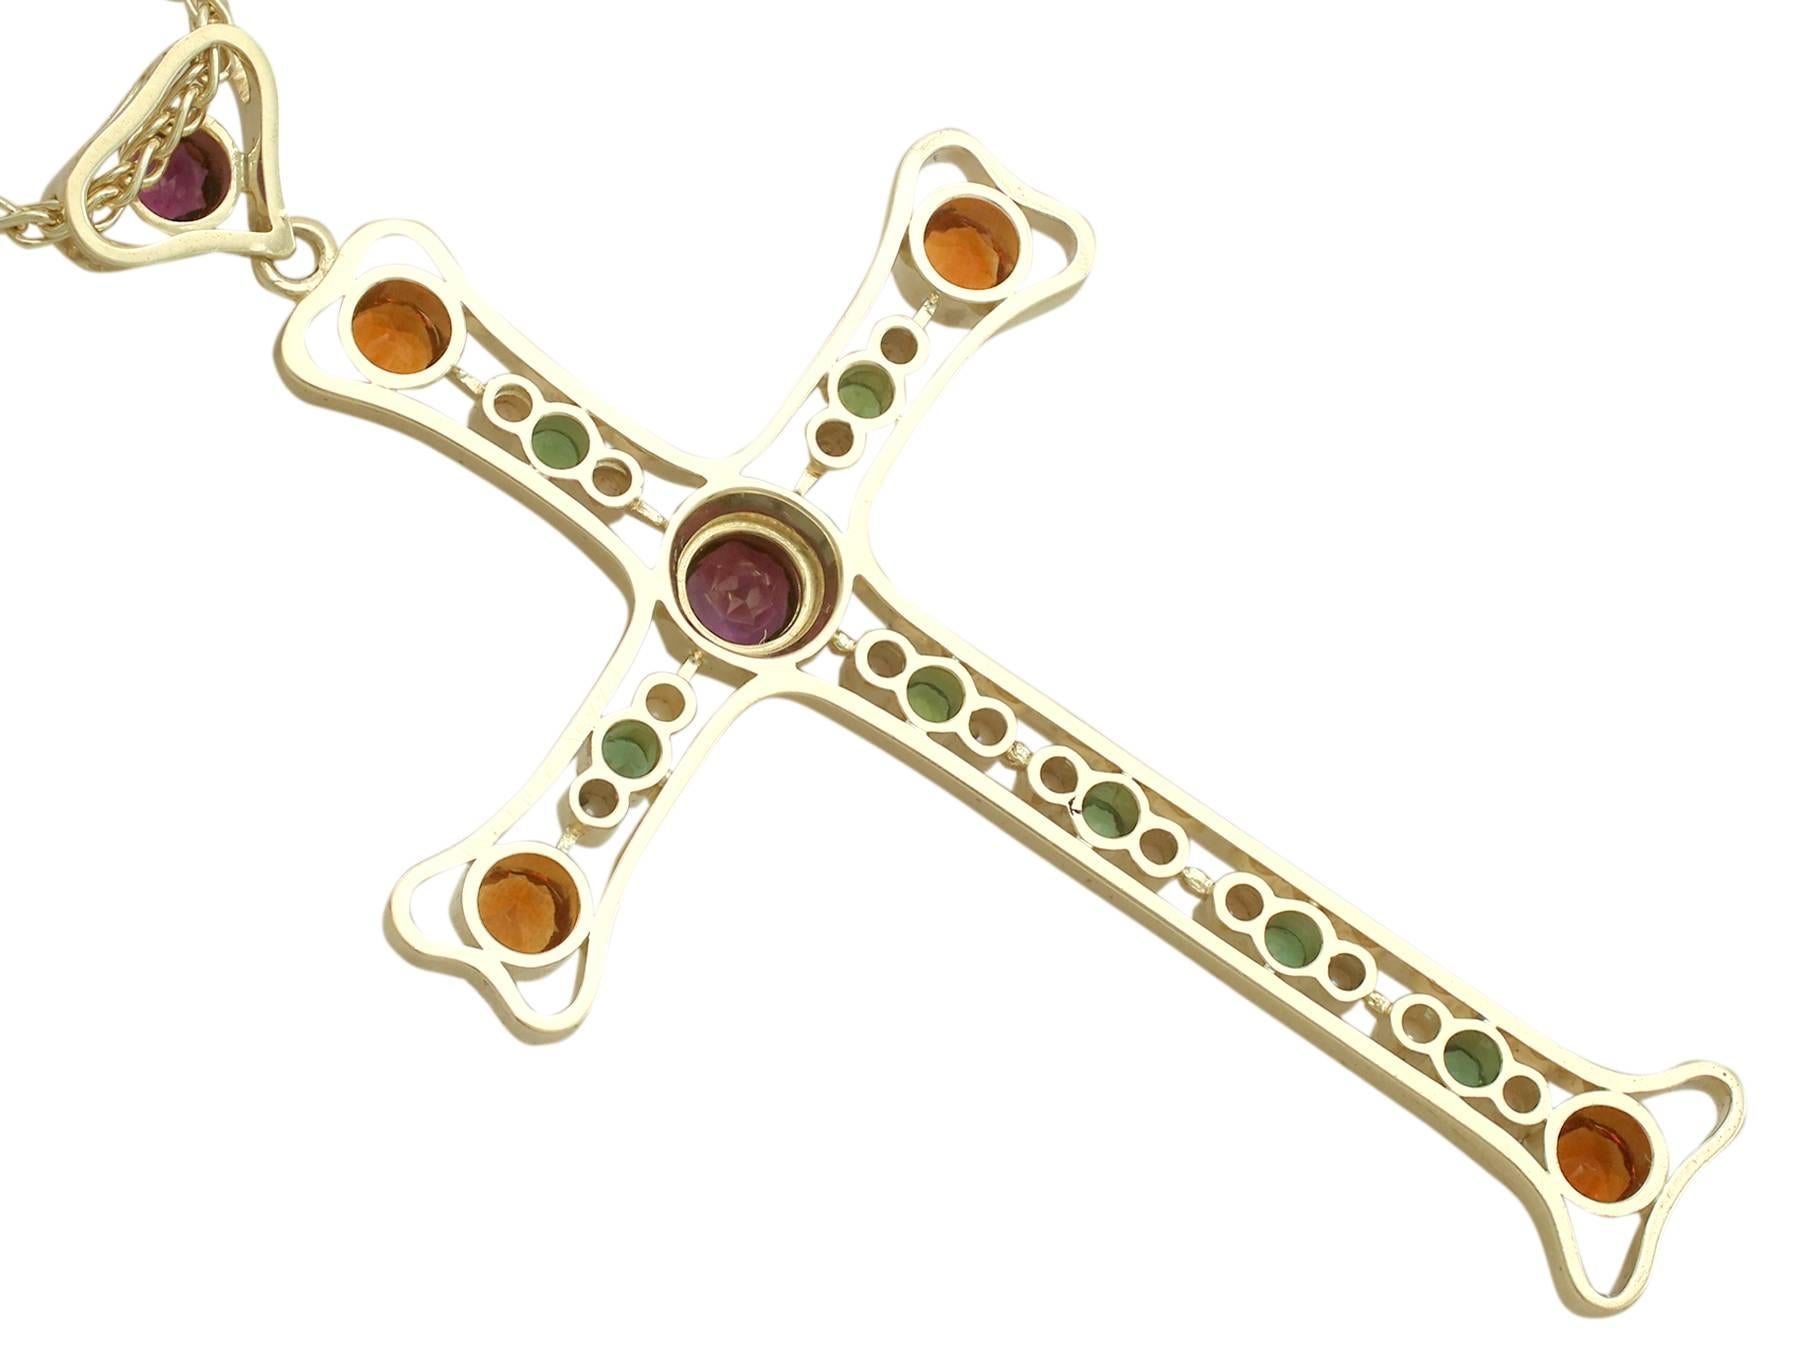 3.35 Carat Amethyst and Peridot Citrine and Seed Pearl Yellow Gold Cross Pendant In Excellent Condition For Sale In Jesmond, Newcastle Upon Tyne